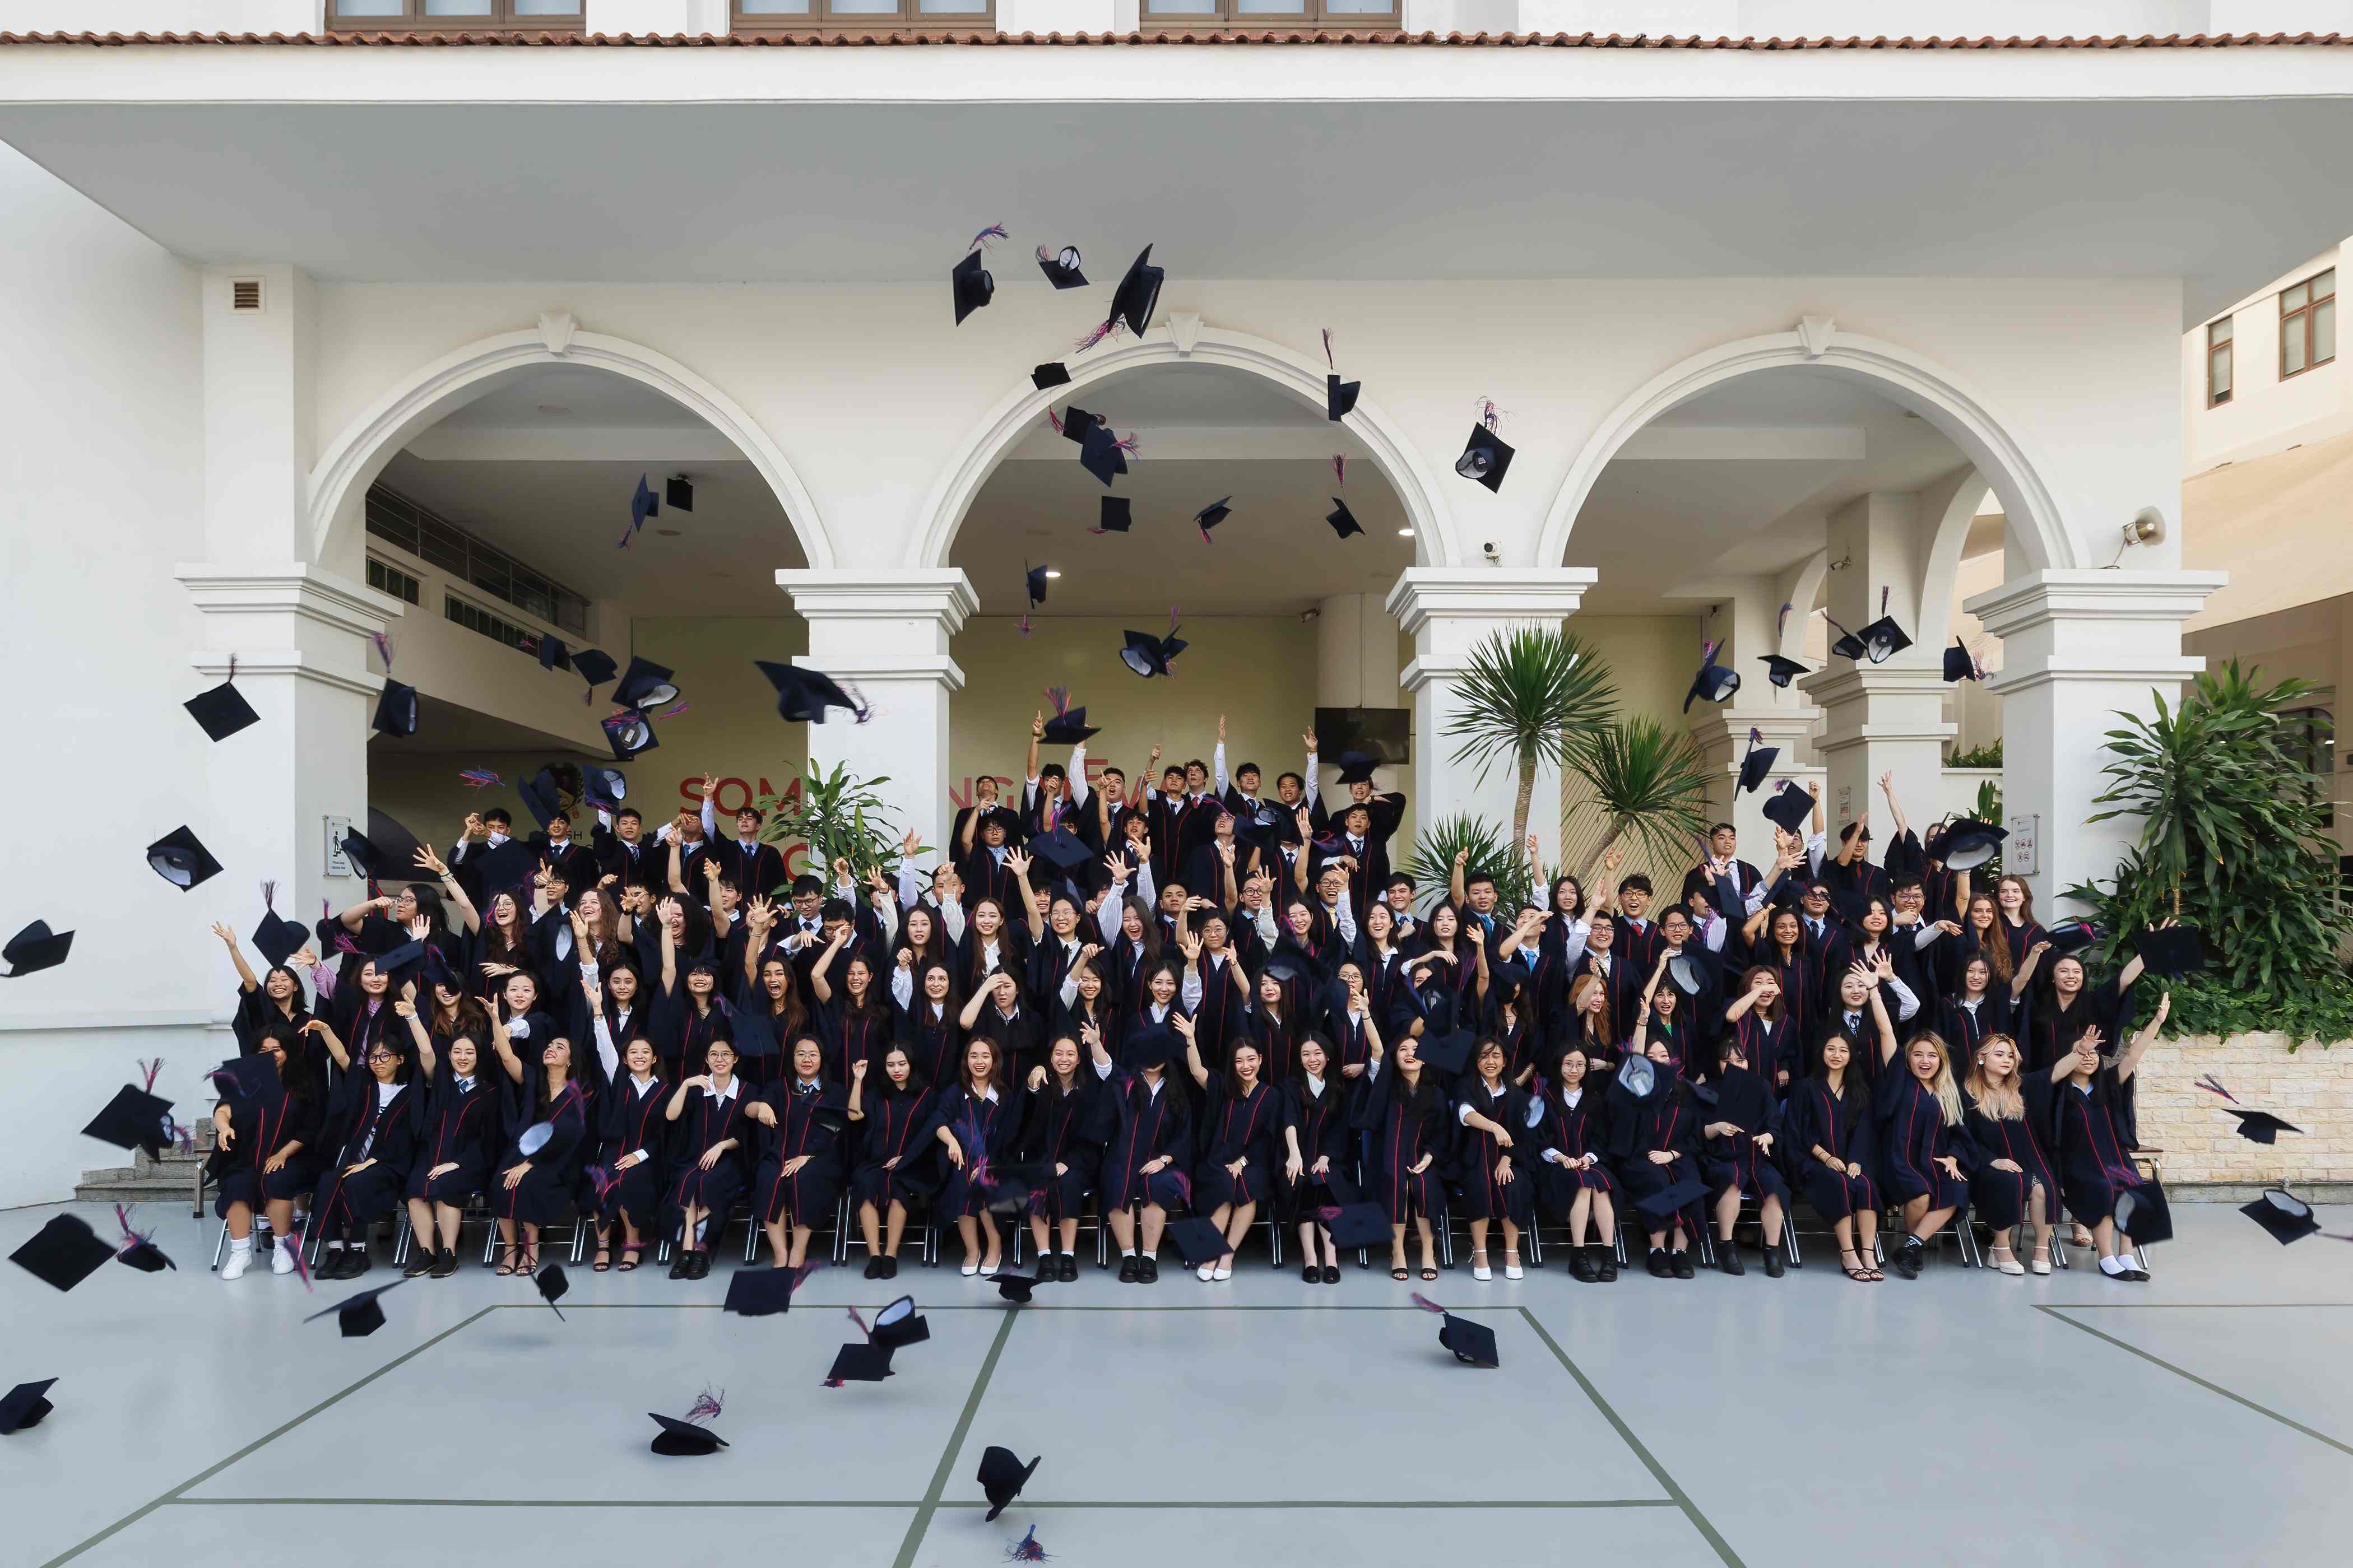 2023 IB results: Nord Anglia Education students outperform global average for 10th year running  - 2023 IB results